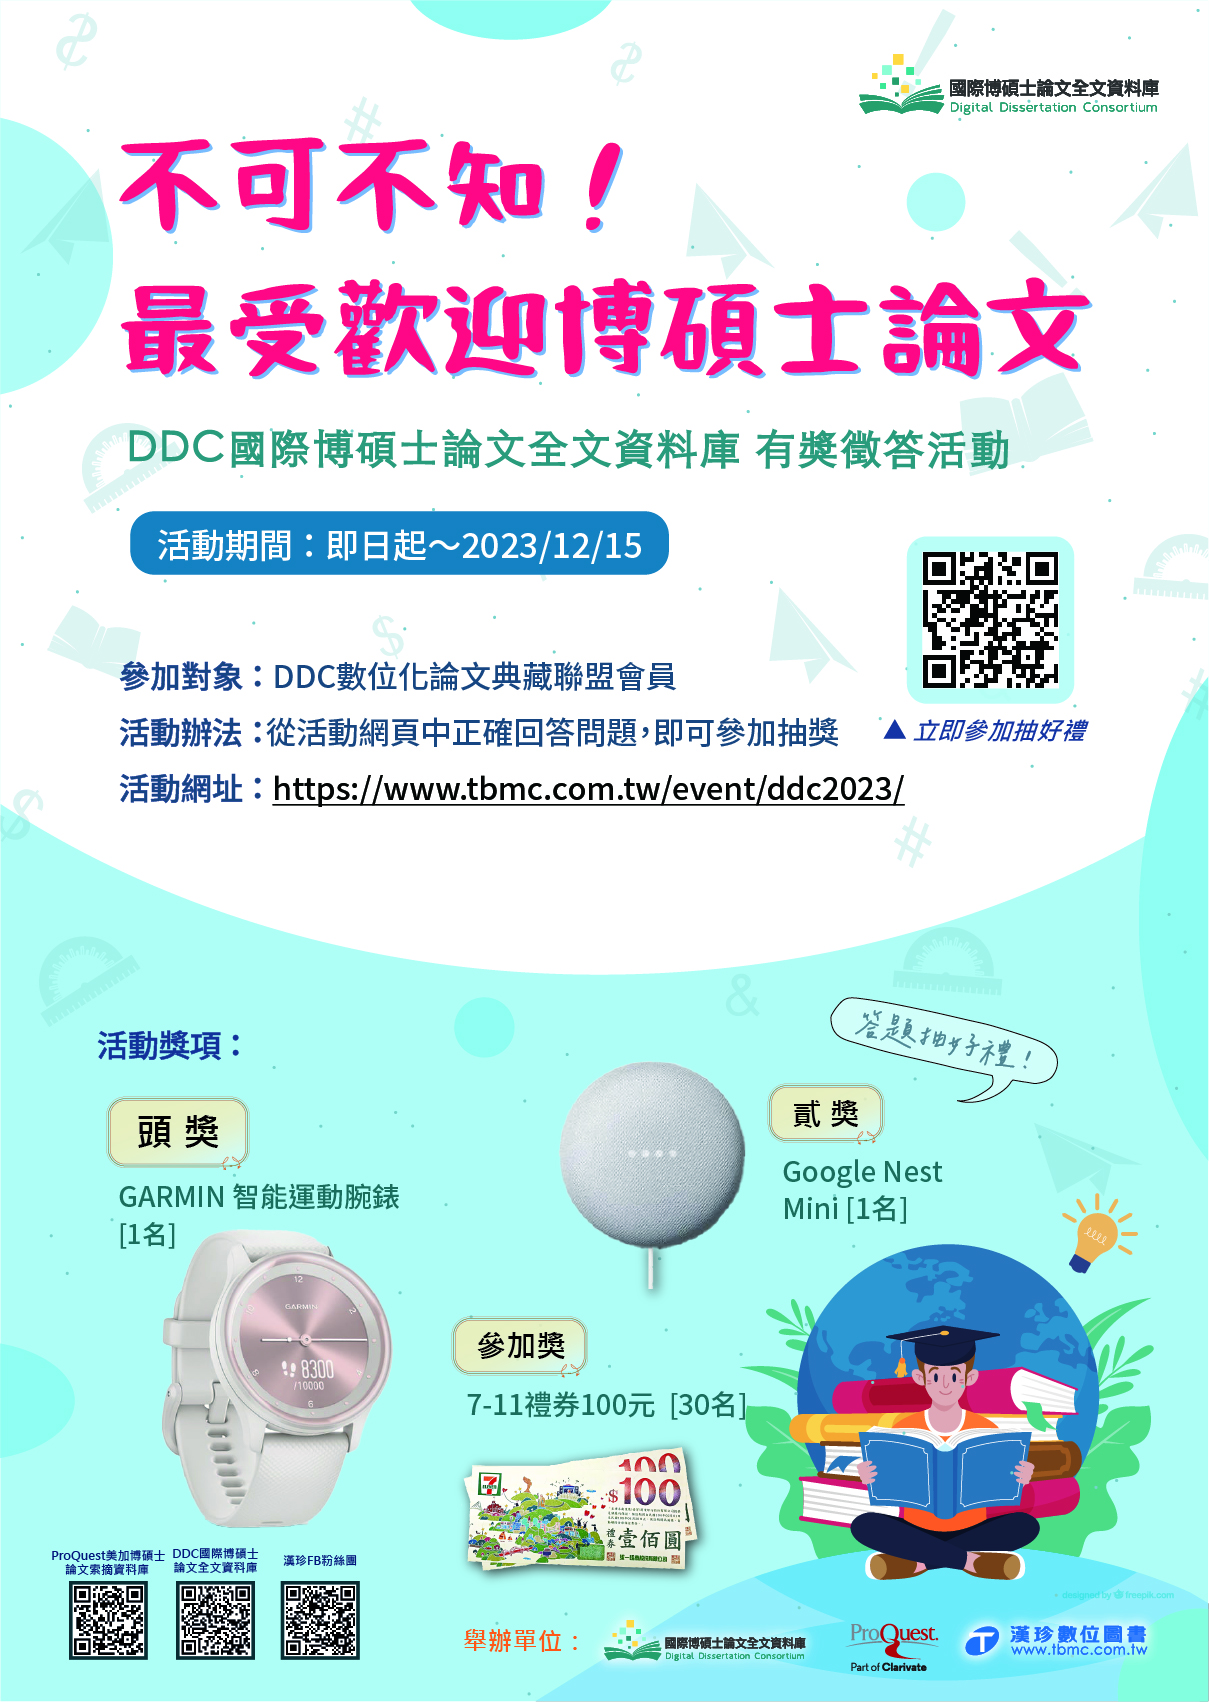 【Activity】DDC Rewarded Questions